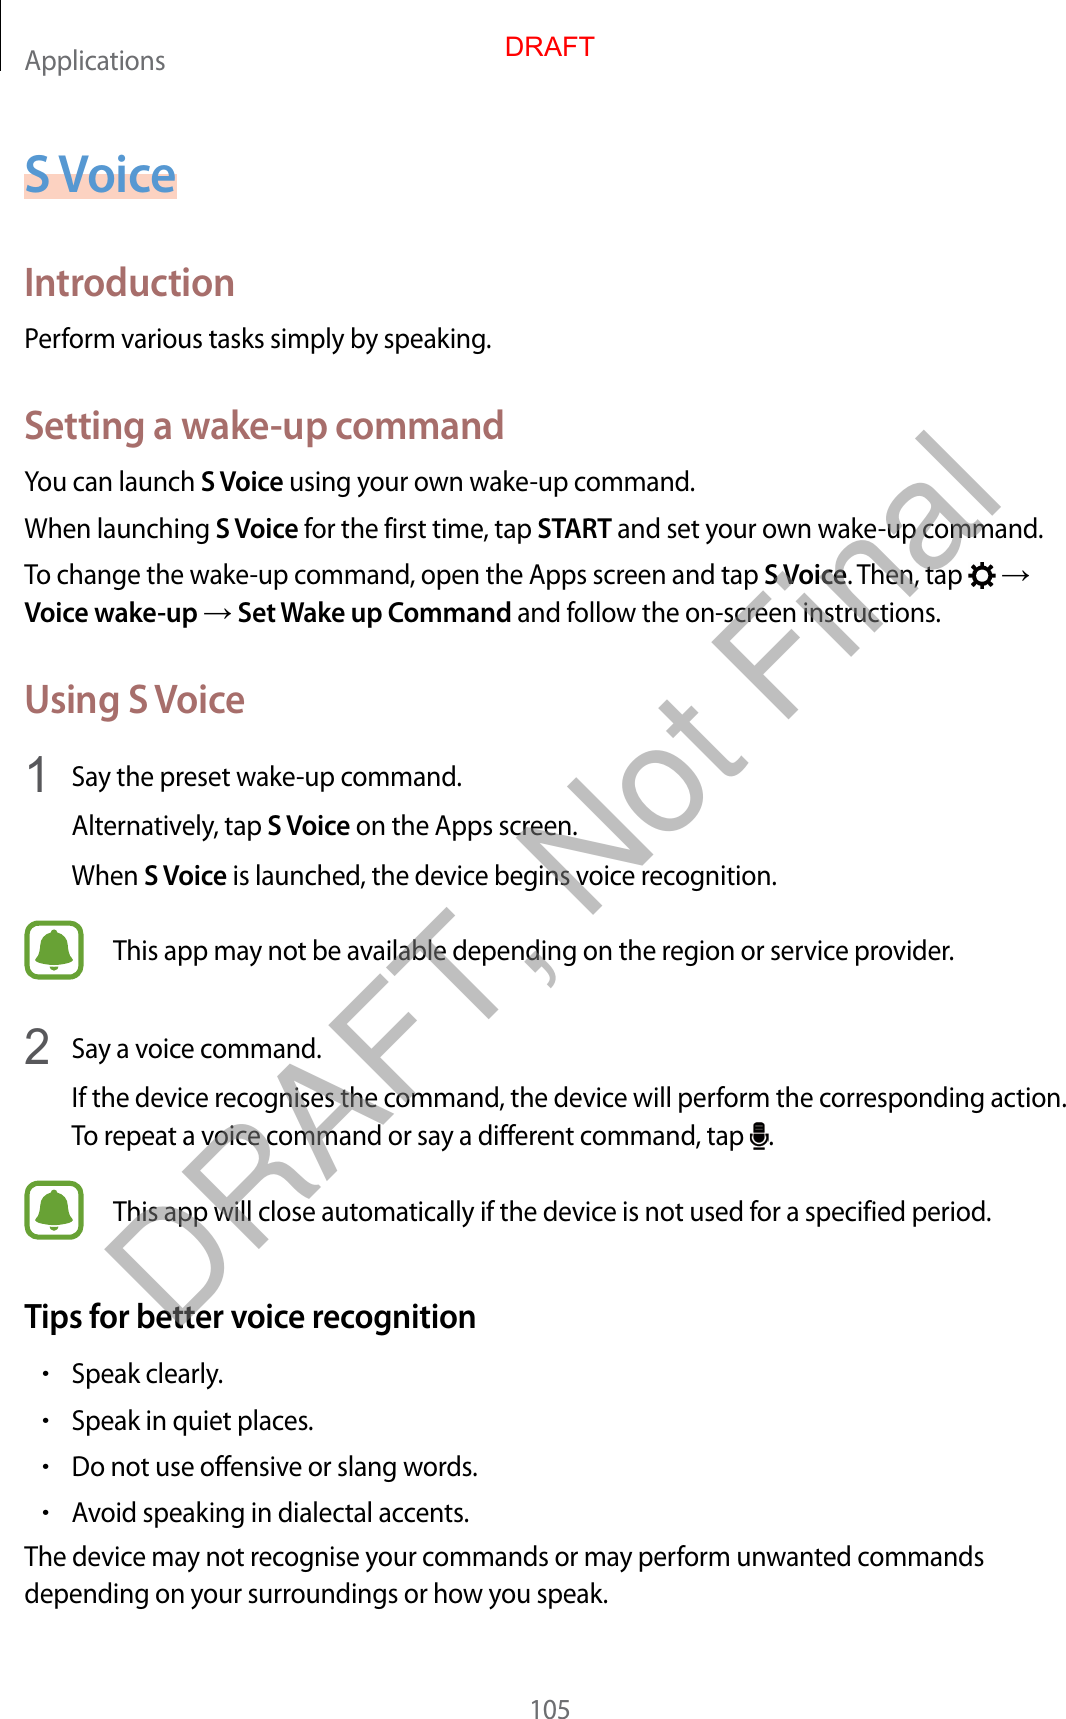 Applications105S VoiceIntroductionPerform various tasks simply by speaking.Setting a wake-up commandYou can launch S Voice using your own wake-up command.When launching S Voice for the first time, tap START and set your own wake-up command.To change the wake-up command, open the Apps screen and tap S Voice. Then, tap    Voice wake-up  Set Wake up Command and follow the on-screen instructions.Using S Voice1  Say the preset wake-up command.Alternatively, tap S Voice on the Apps screen.When S Voice is launched, the device begins voice recognition.This app may not be available depending on the region or service provider.2  Say a voice command.If the device recognises the command, the device will perform the corresponding action. To repeat a voice command or say a different command, tap  .This app will close automatically if the device is not used for a specified period.Tips for better voice recognition•Speak clearly.•Speak in quiet places.•Do not use offensive or slang words.•Avoid speaking in dialectal accents.The device may not recognise your commands or may perform unwanted commands depending on your surroundings or how you speak.DRAFTDRAFT, Not Final